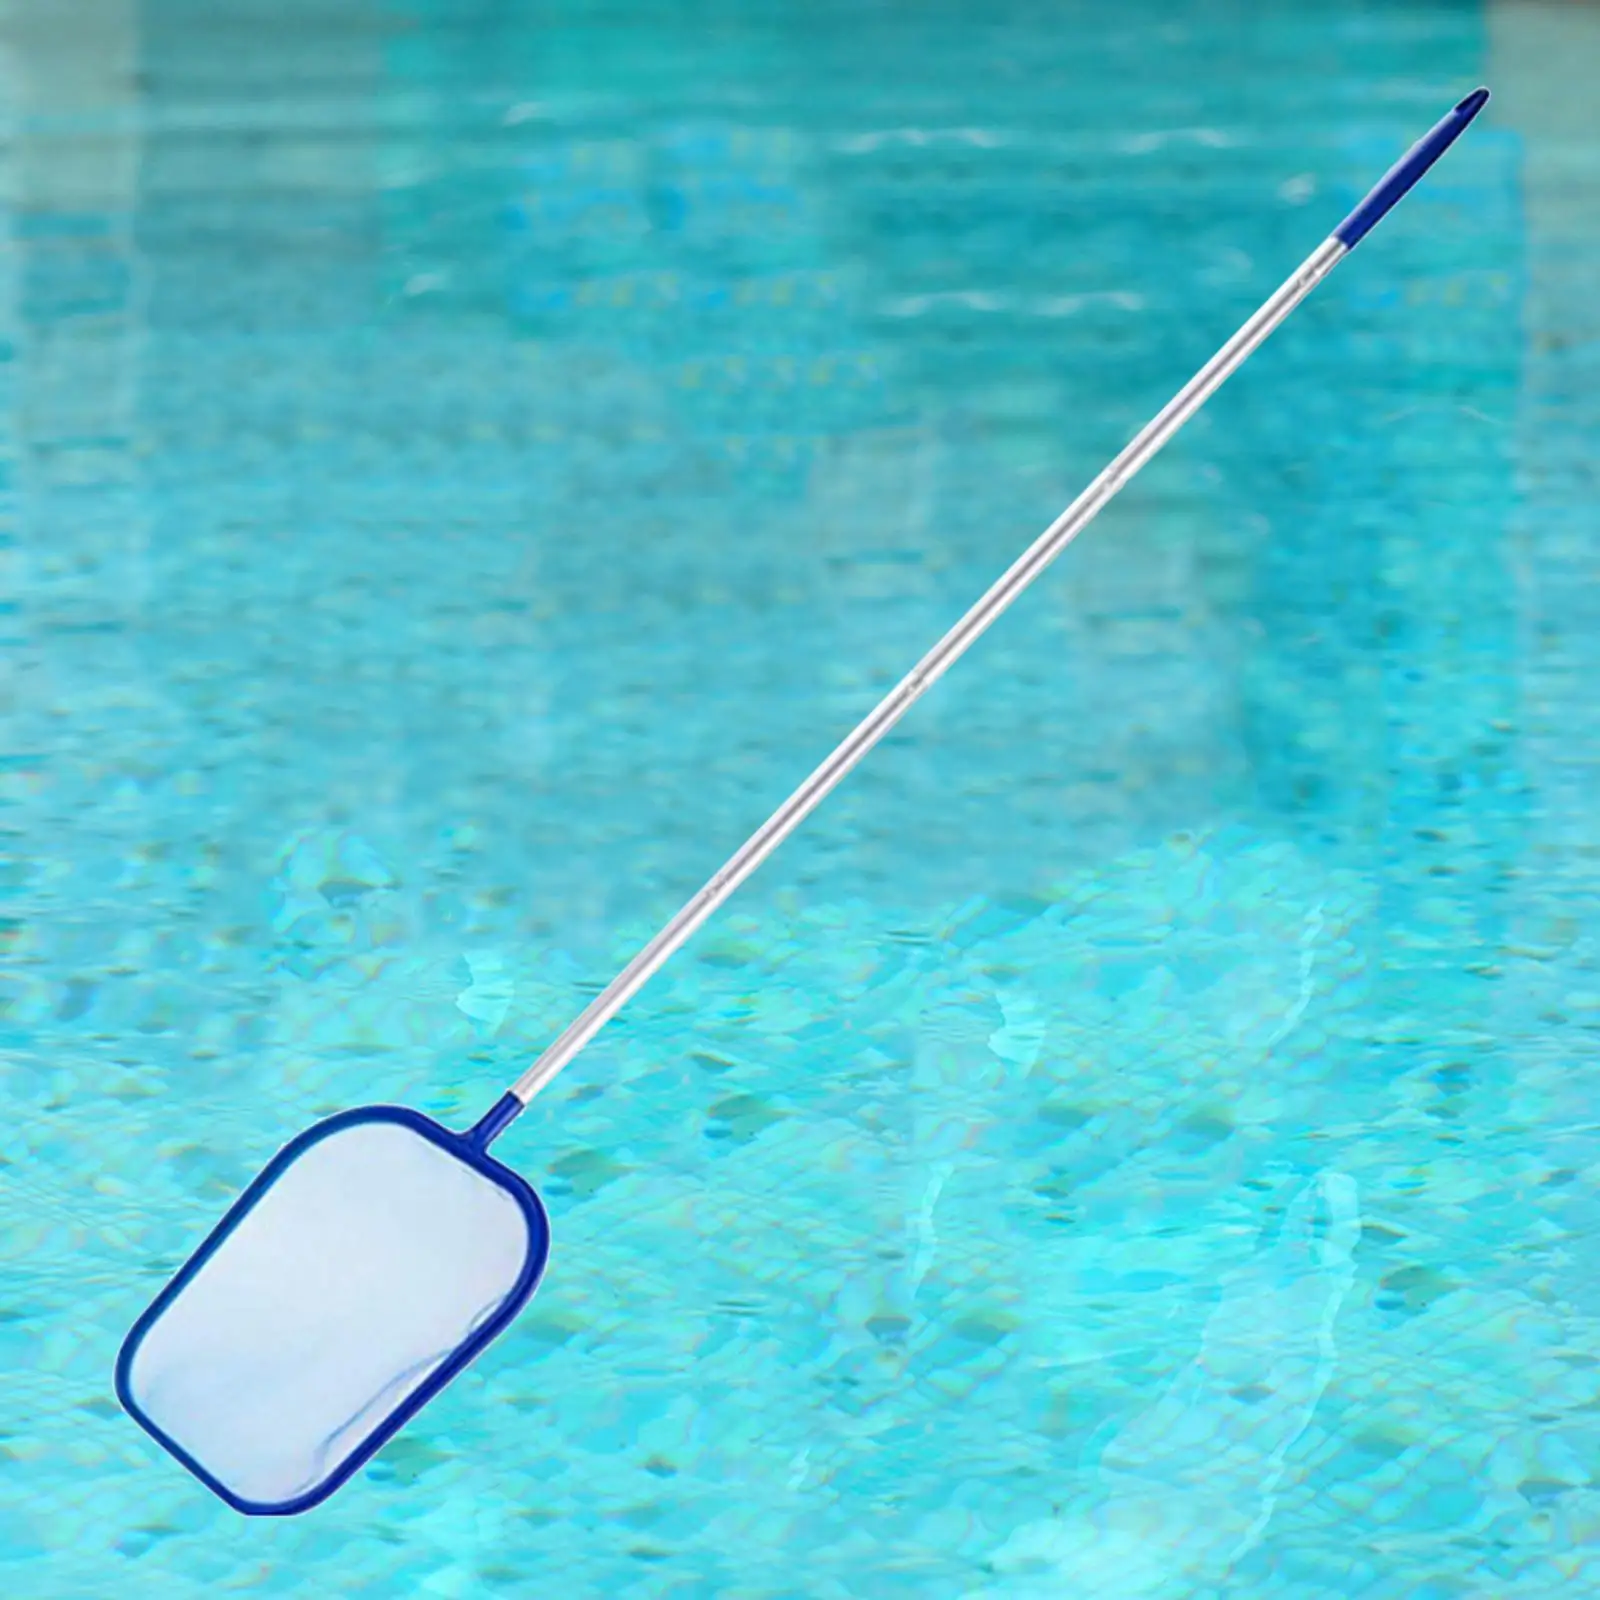 Swimming Pool Cleaning Set   Brush Fine Mesh Netting  Maintenance for Above Ground Pools Fountains